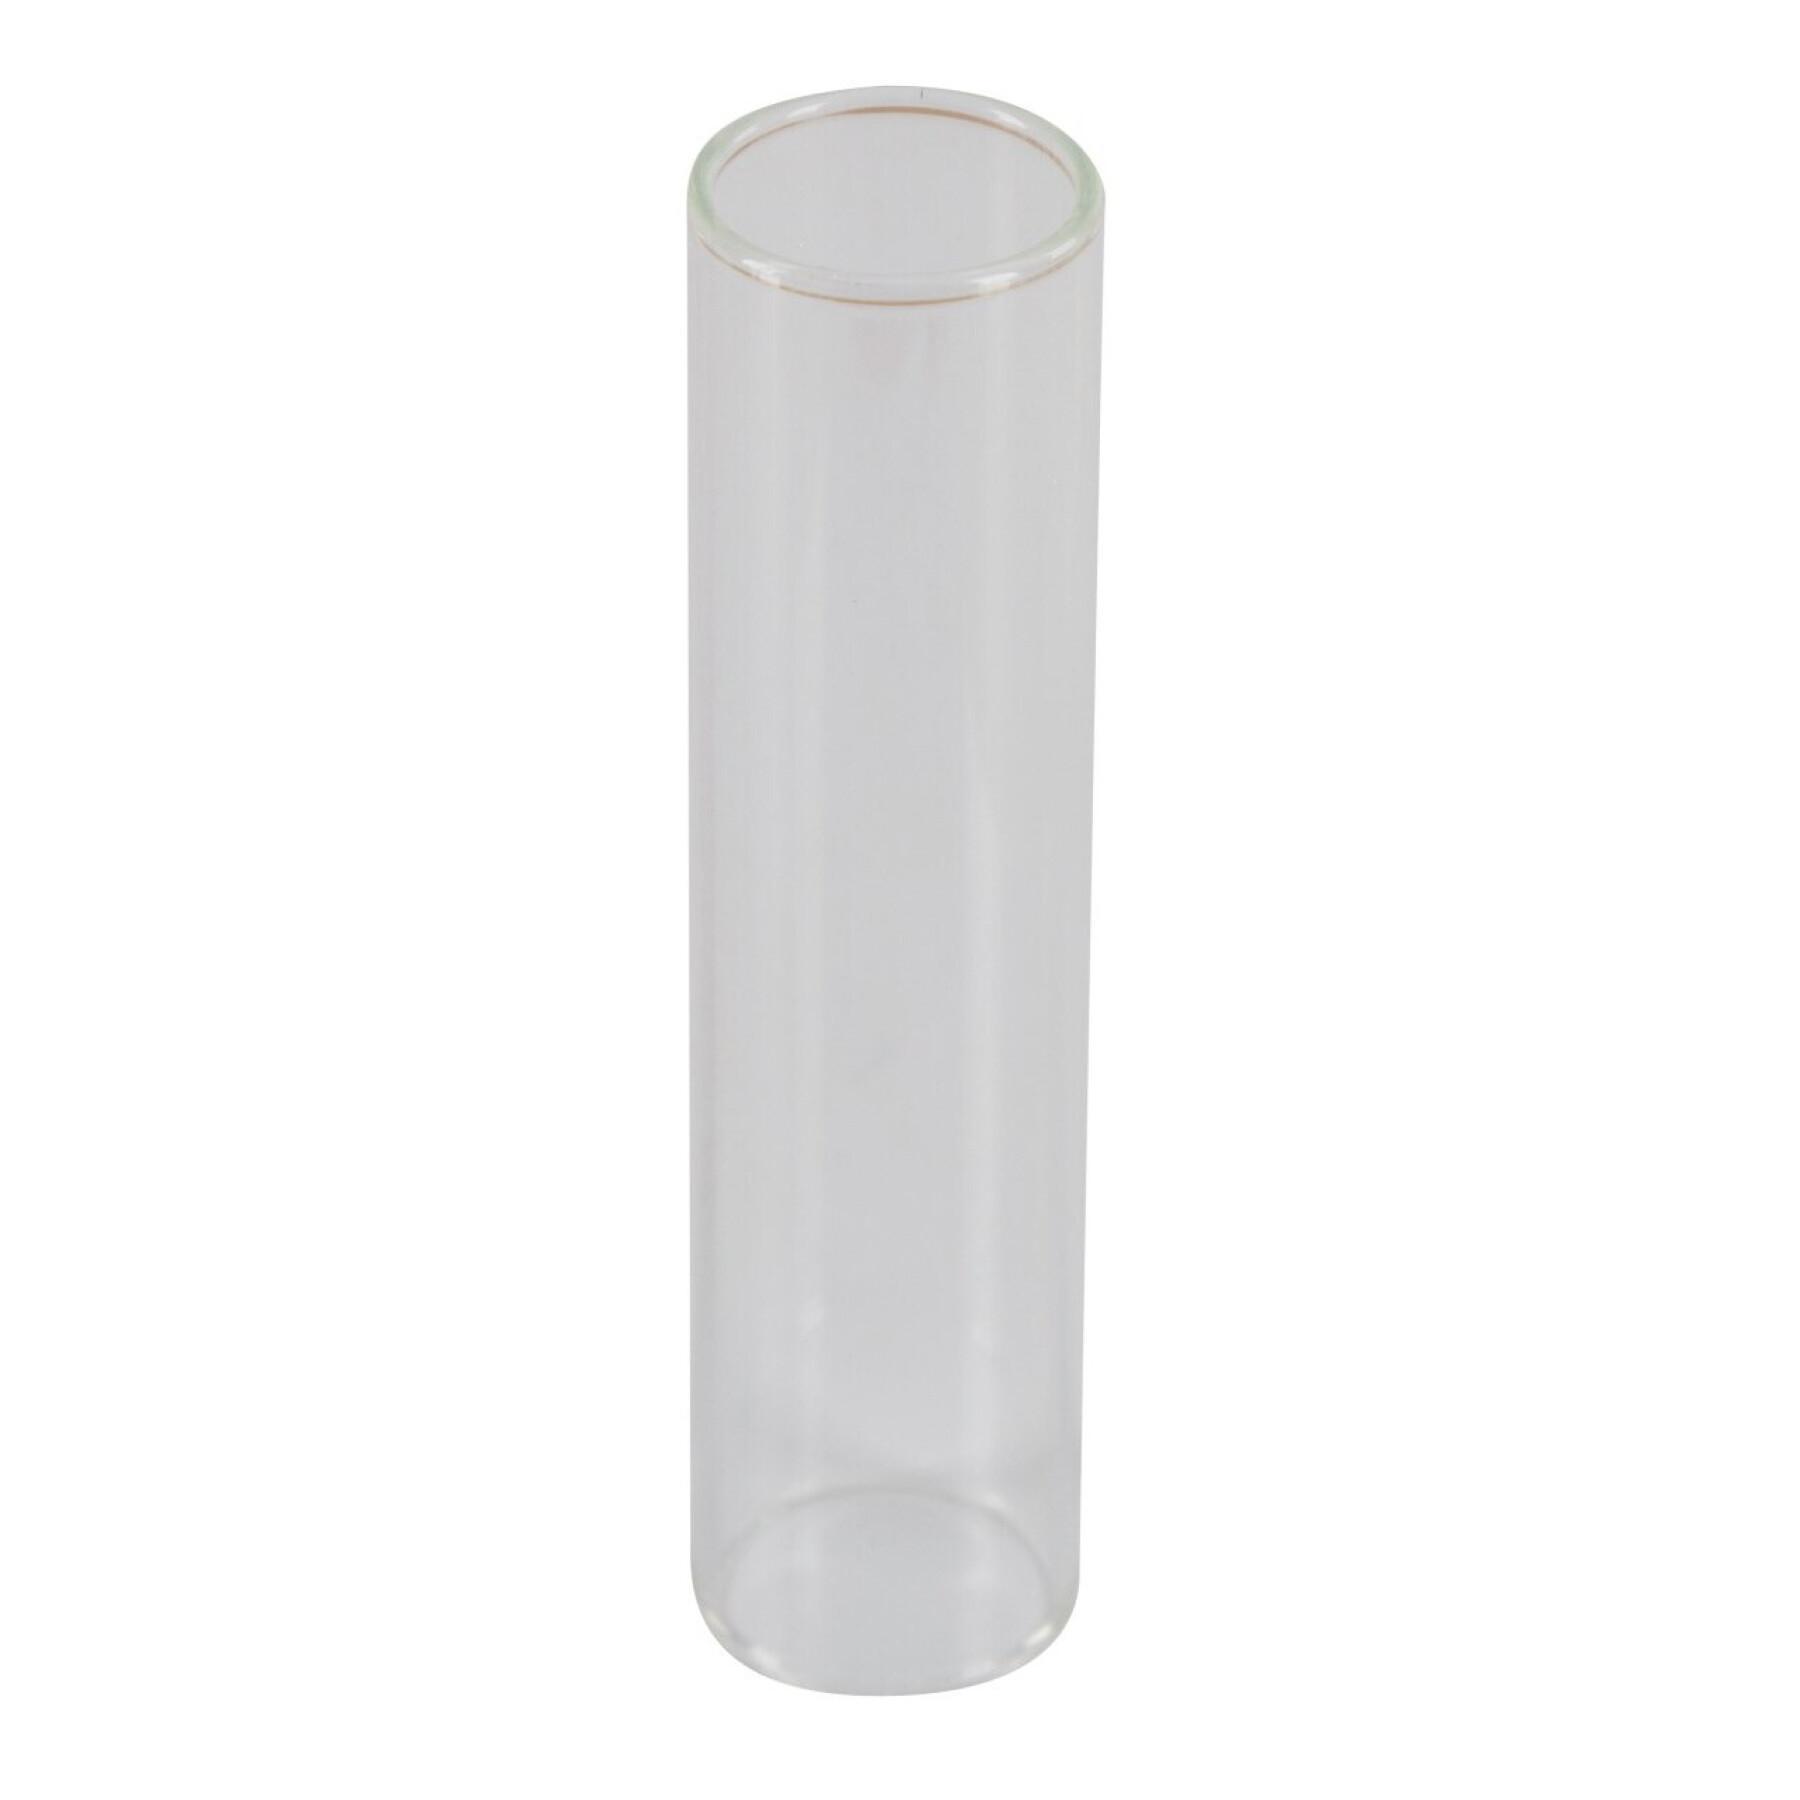 Replacement glass for red syringe Kerbl